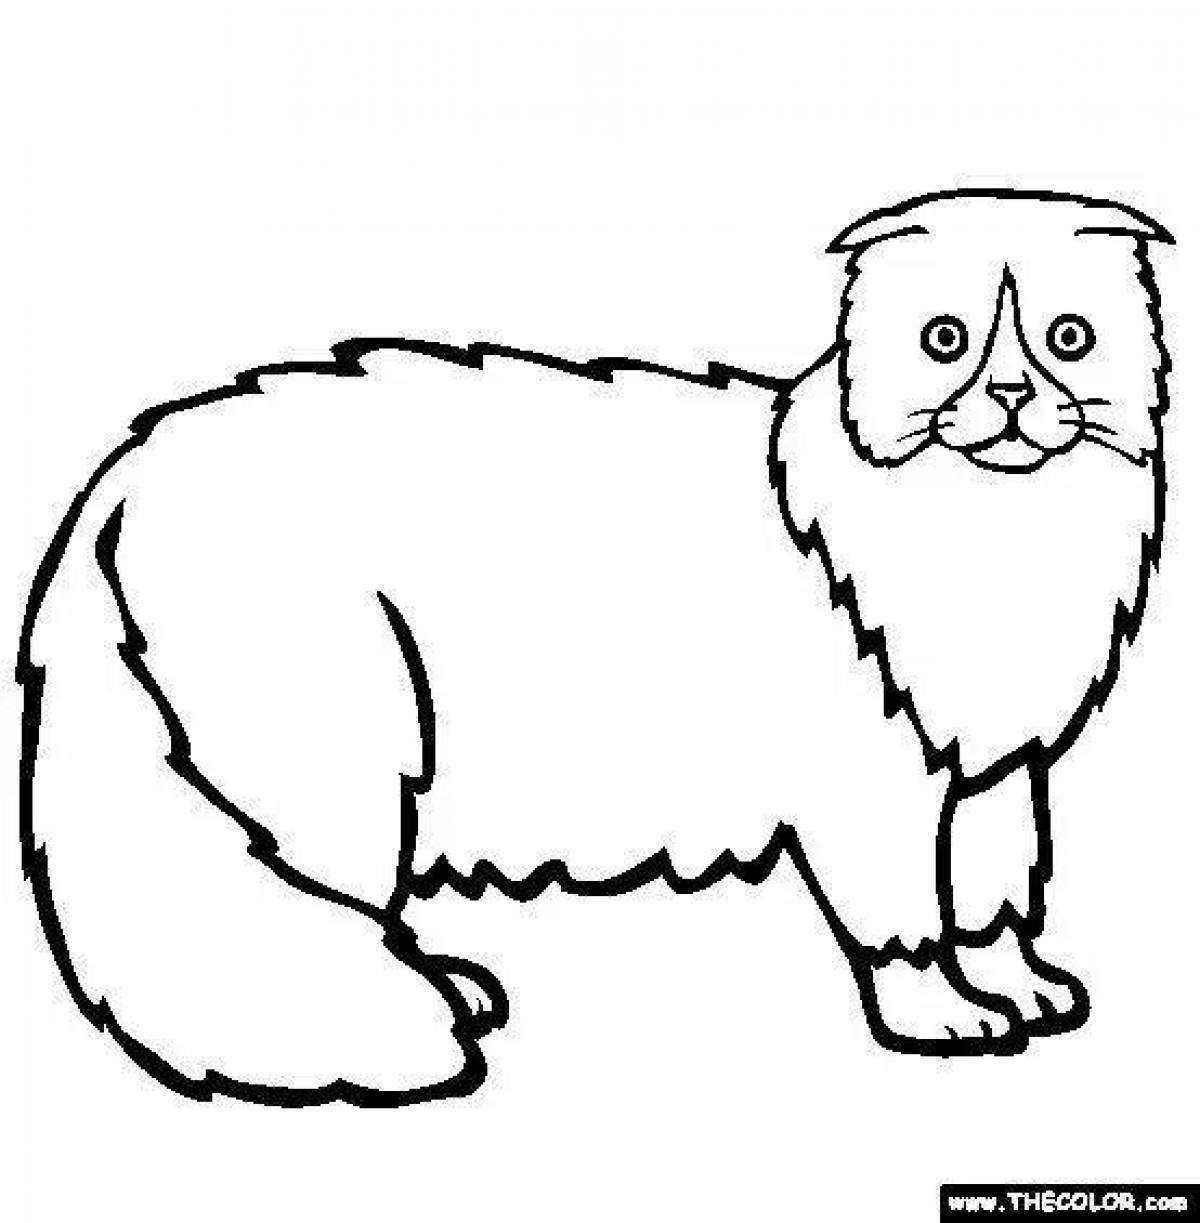 Animated fold cat coloring page